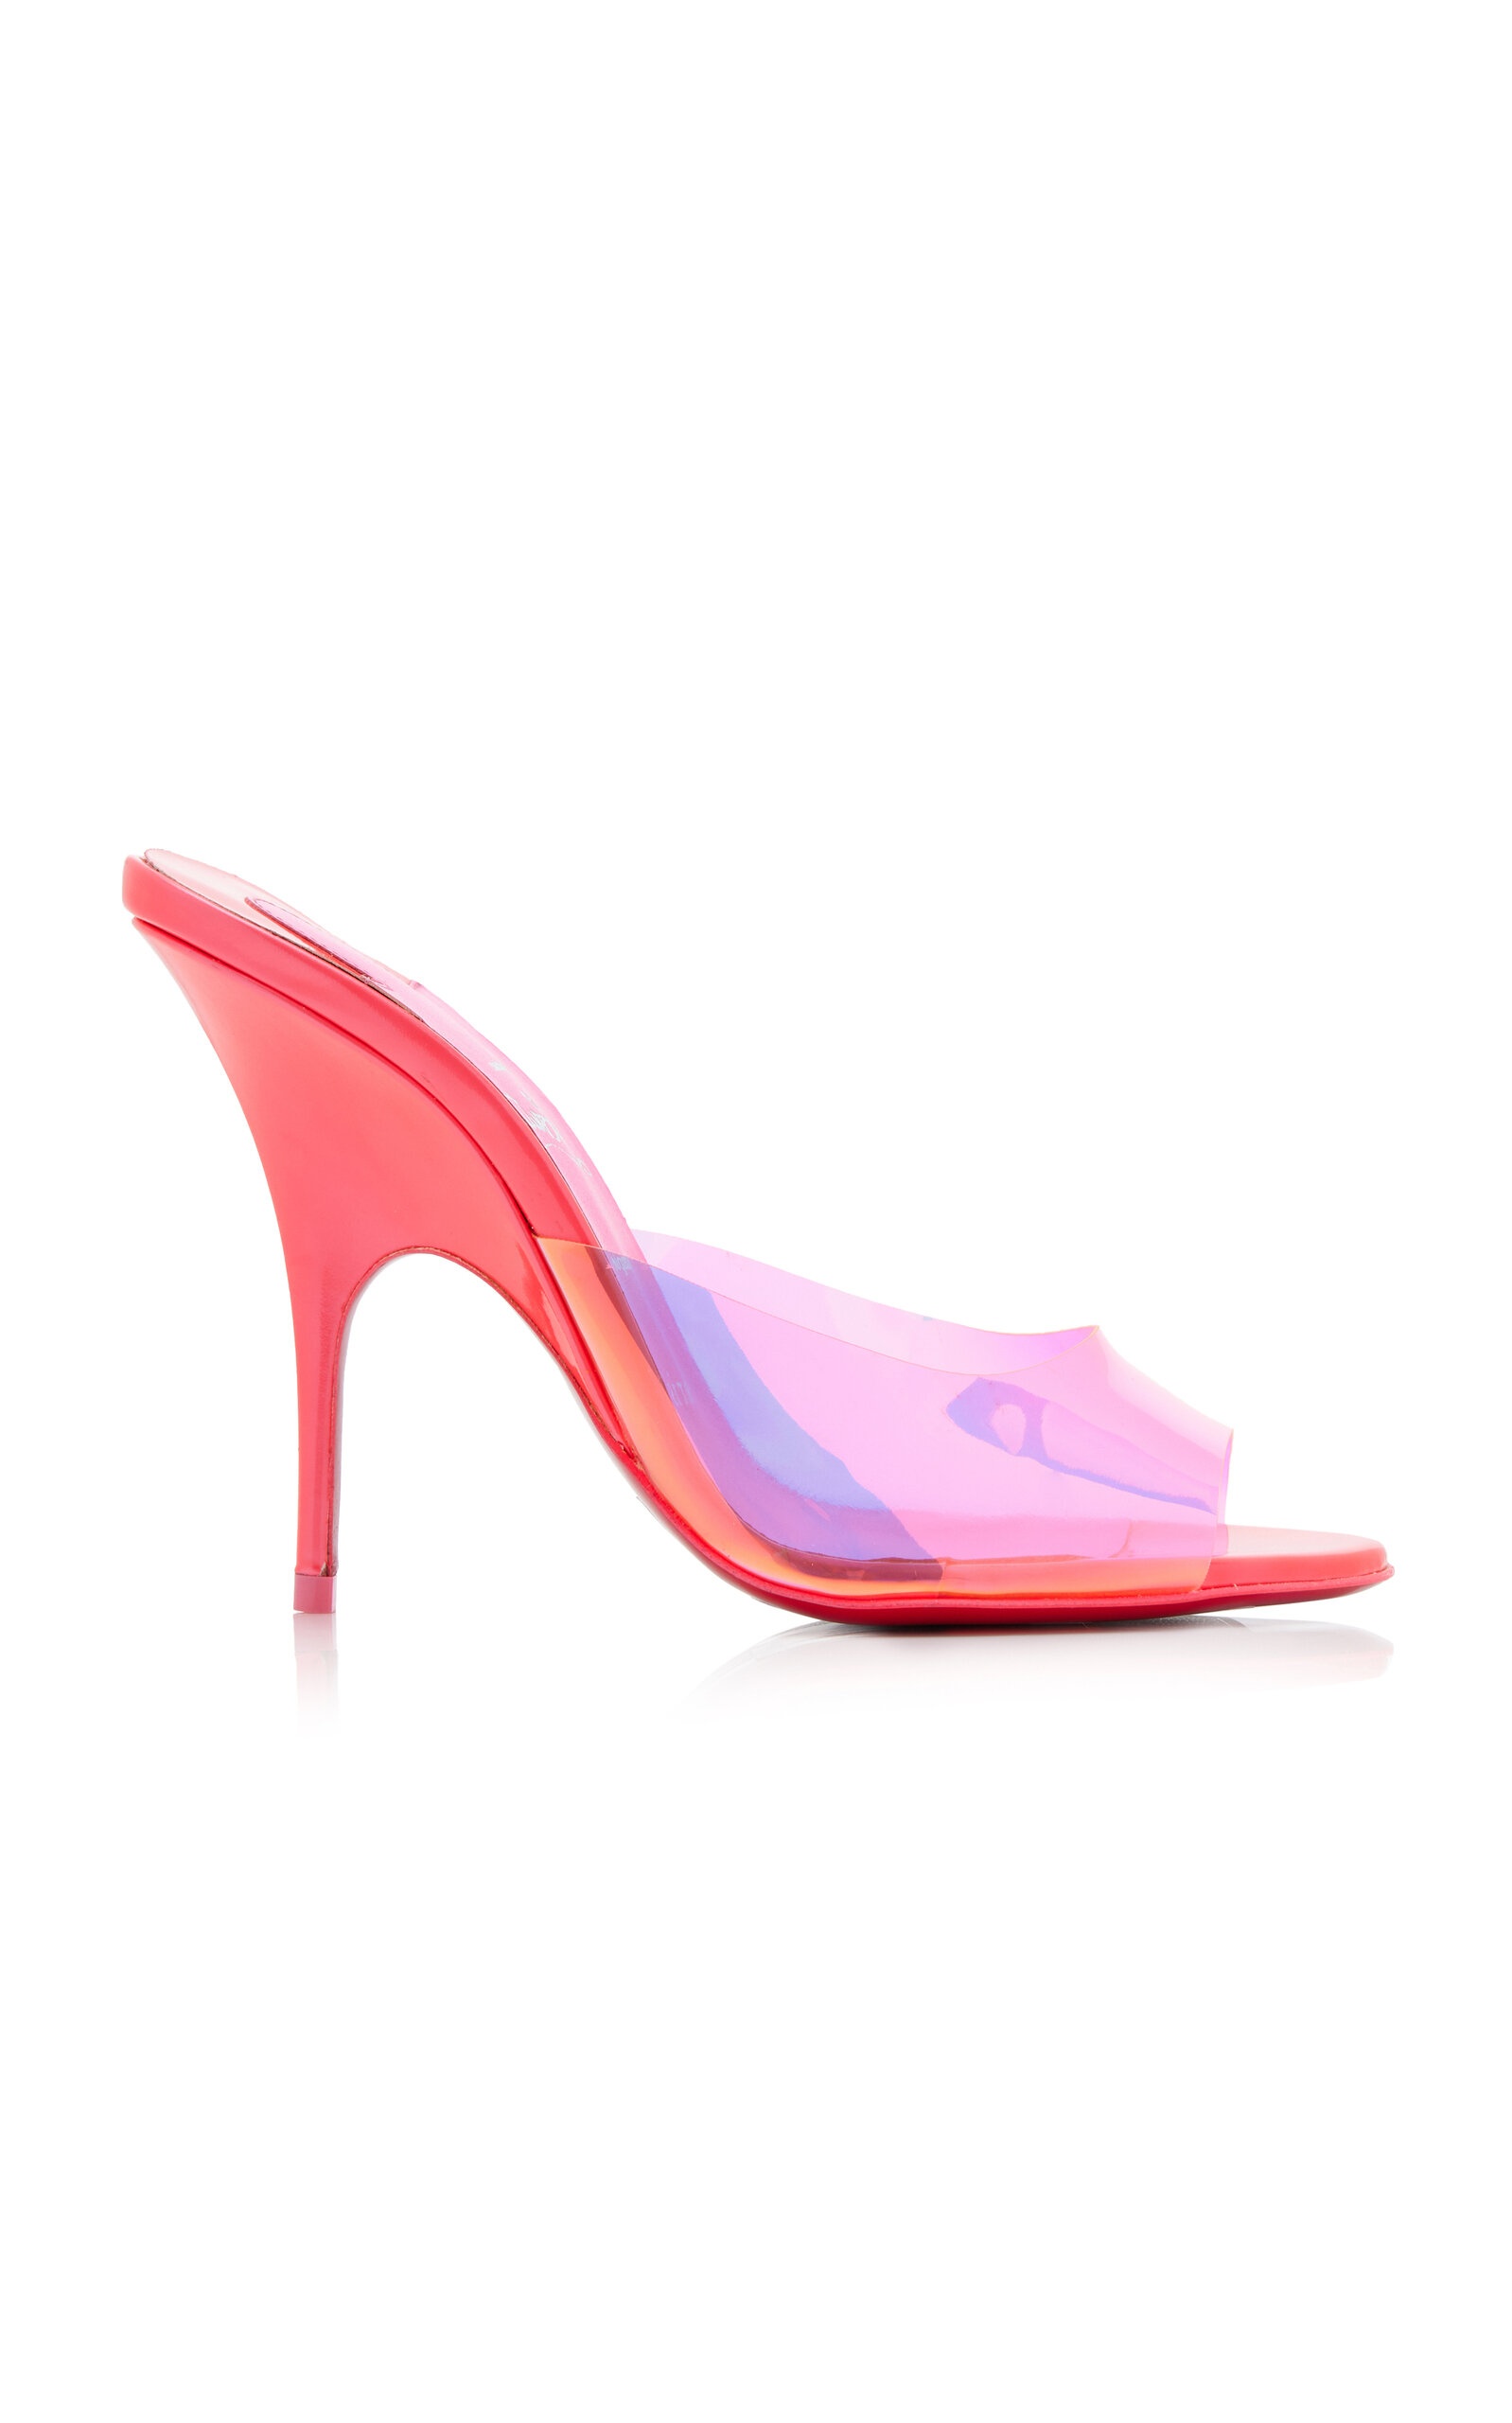 Just Arch Patent Leather and PVC Sandals pink - 1